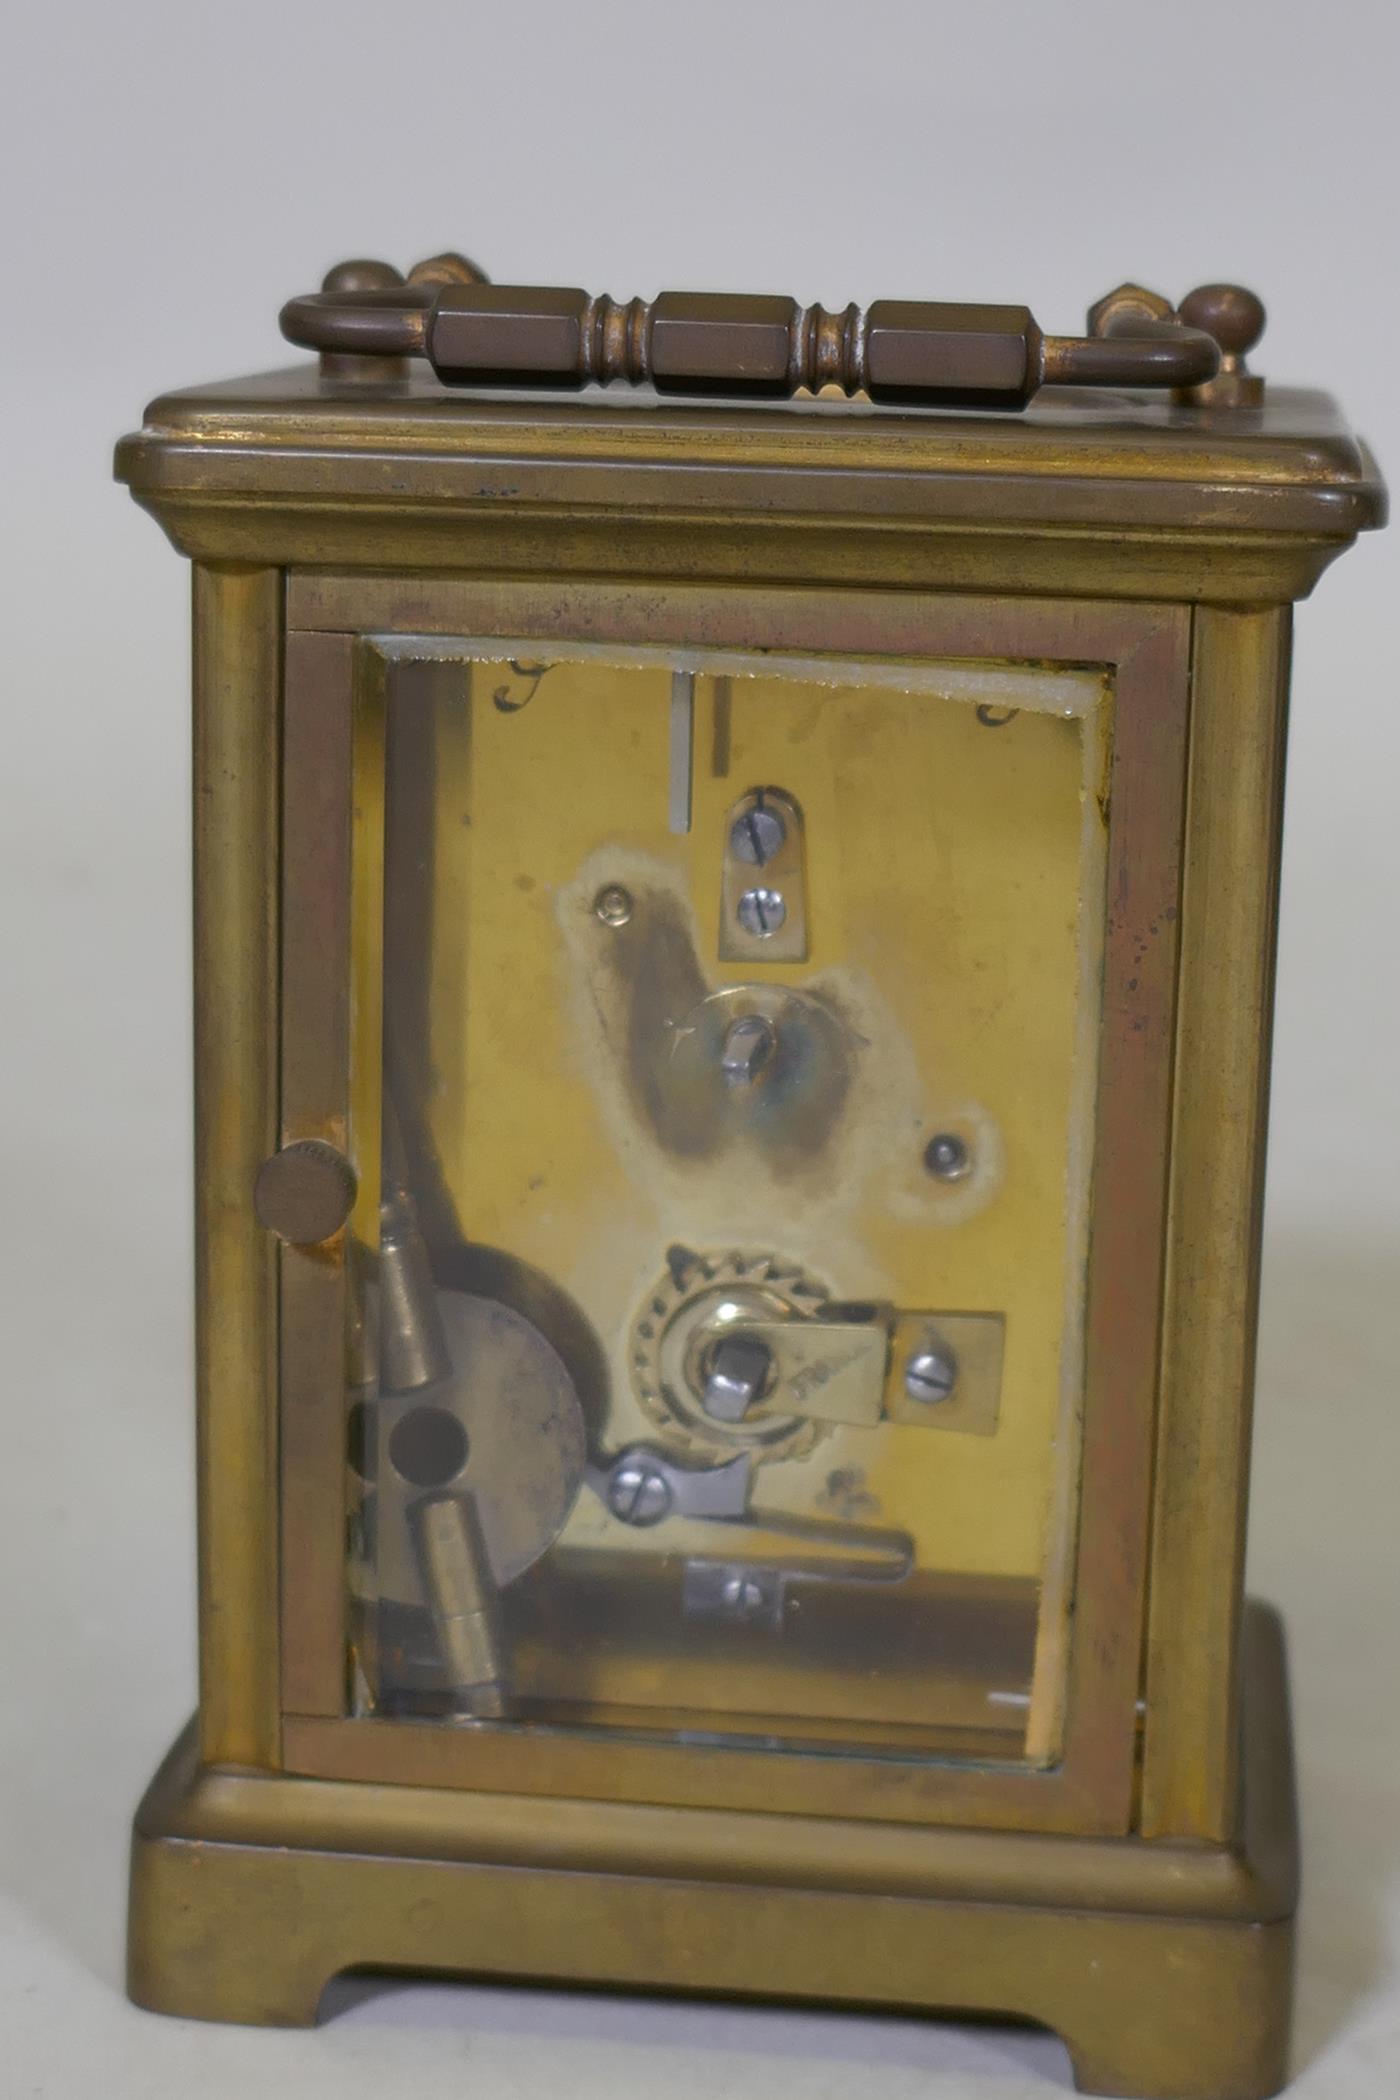 A brass cased glass carriage clock with enamel dial, 12cm high - Image 3 of 3